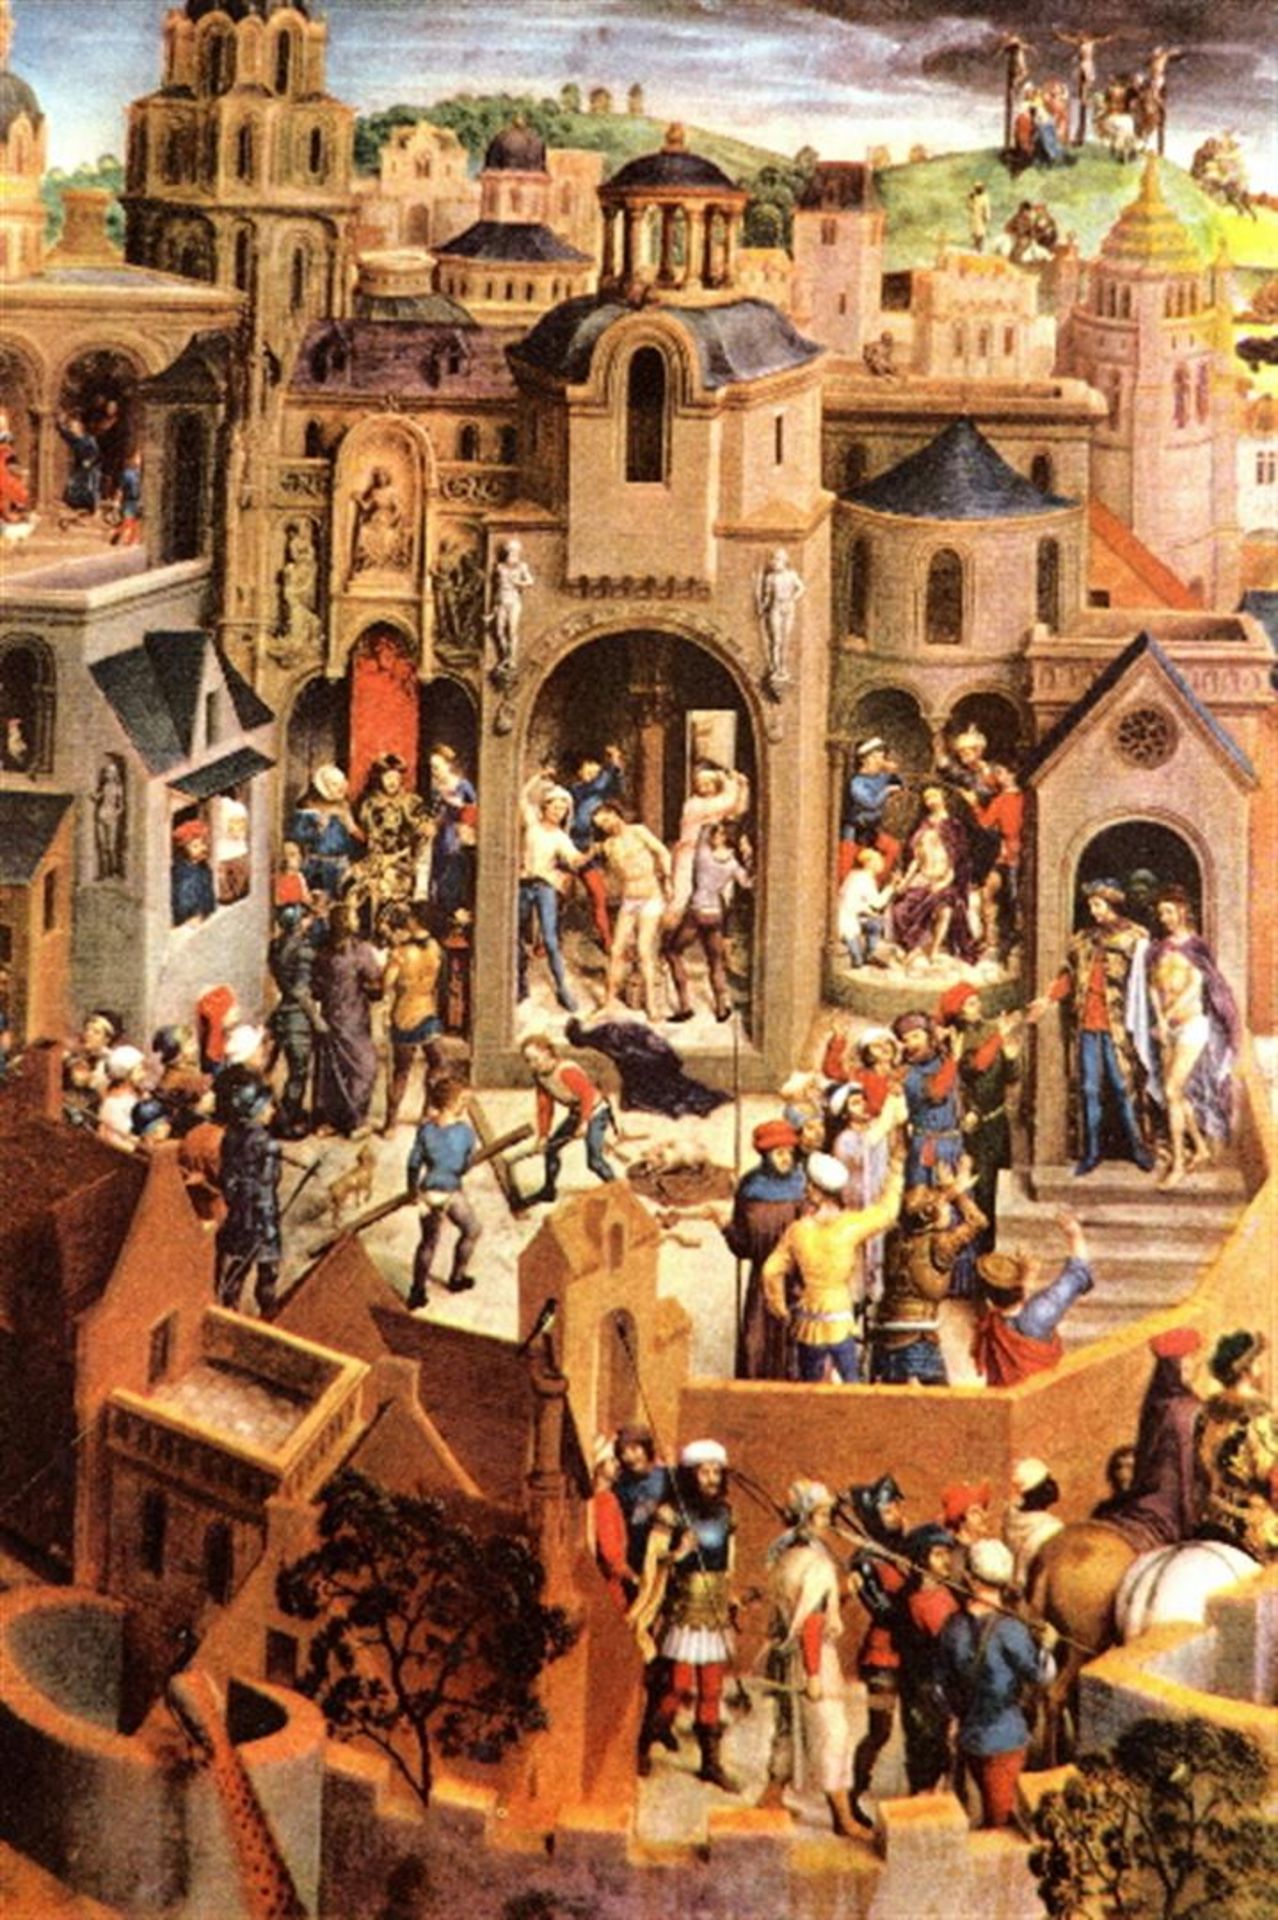 Hans Memling - The Passion of Christ